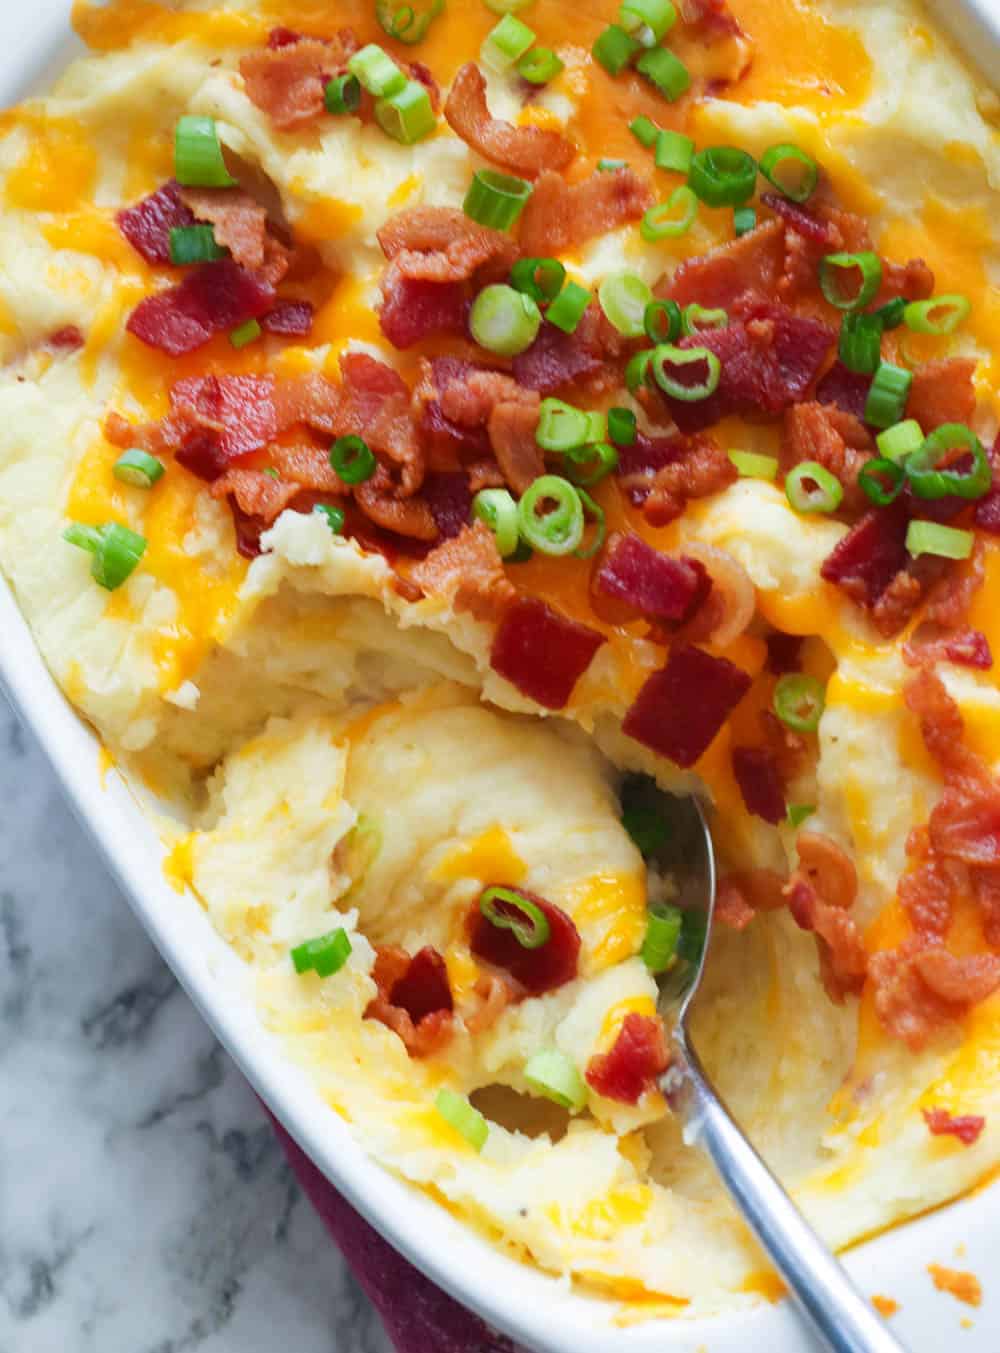 This Loaded Mashed Potato Casserole enjoys fully loaded baked potato flavors in a ridiculously easy casserole dish.